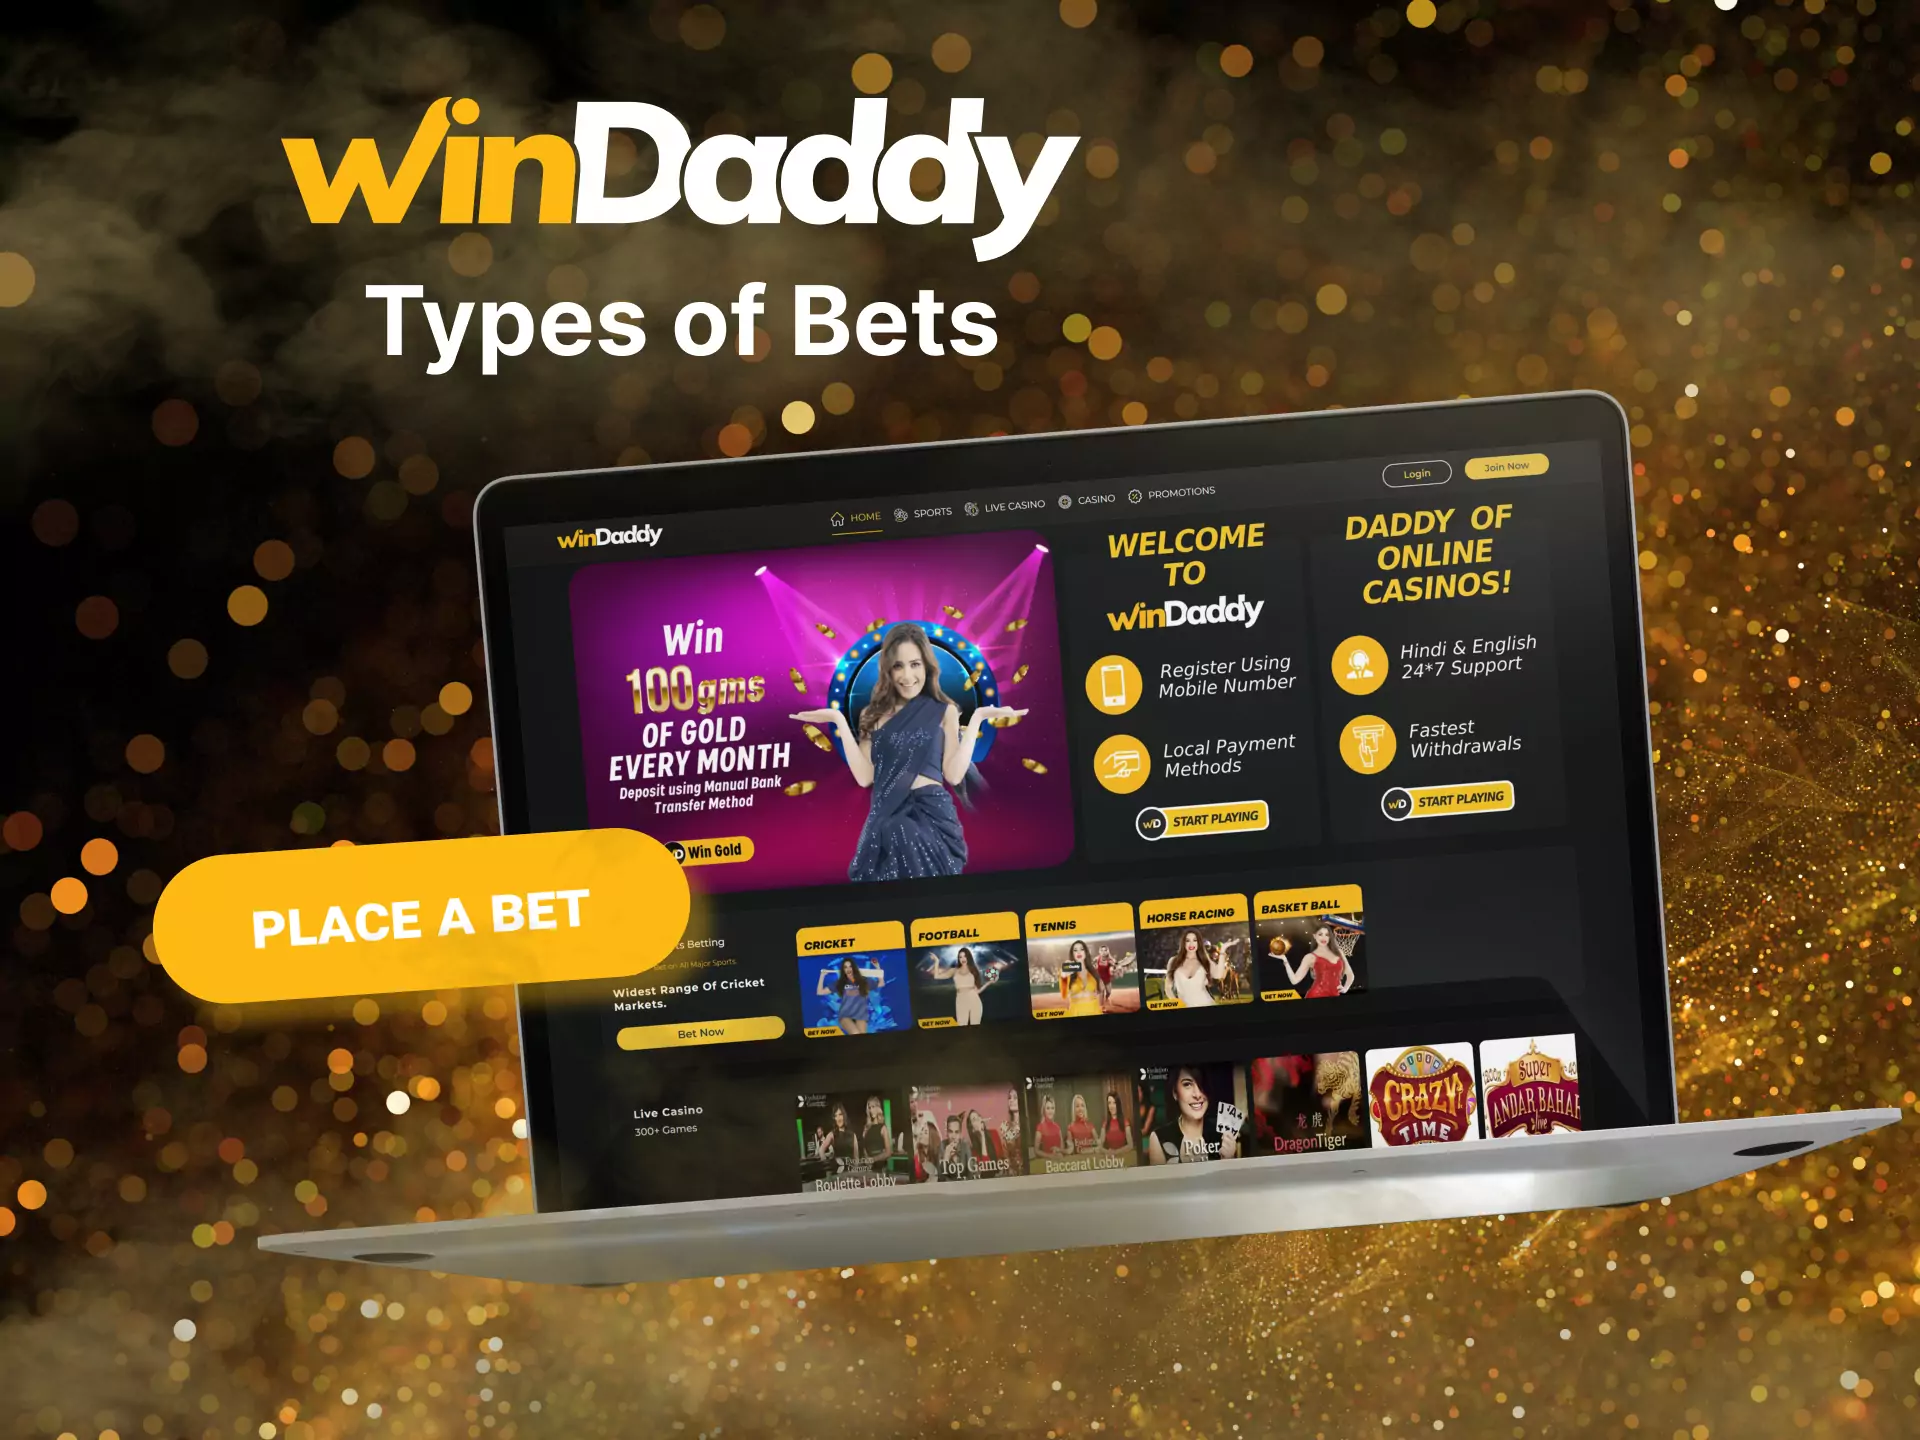 Try the popular types of bets on Windaddy.